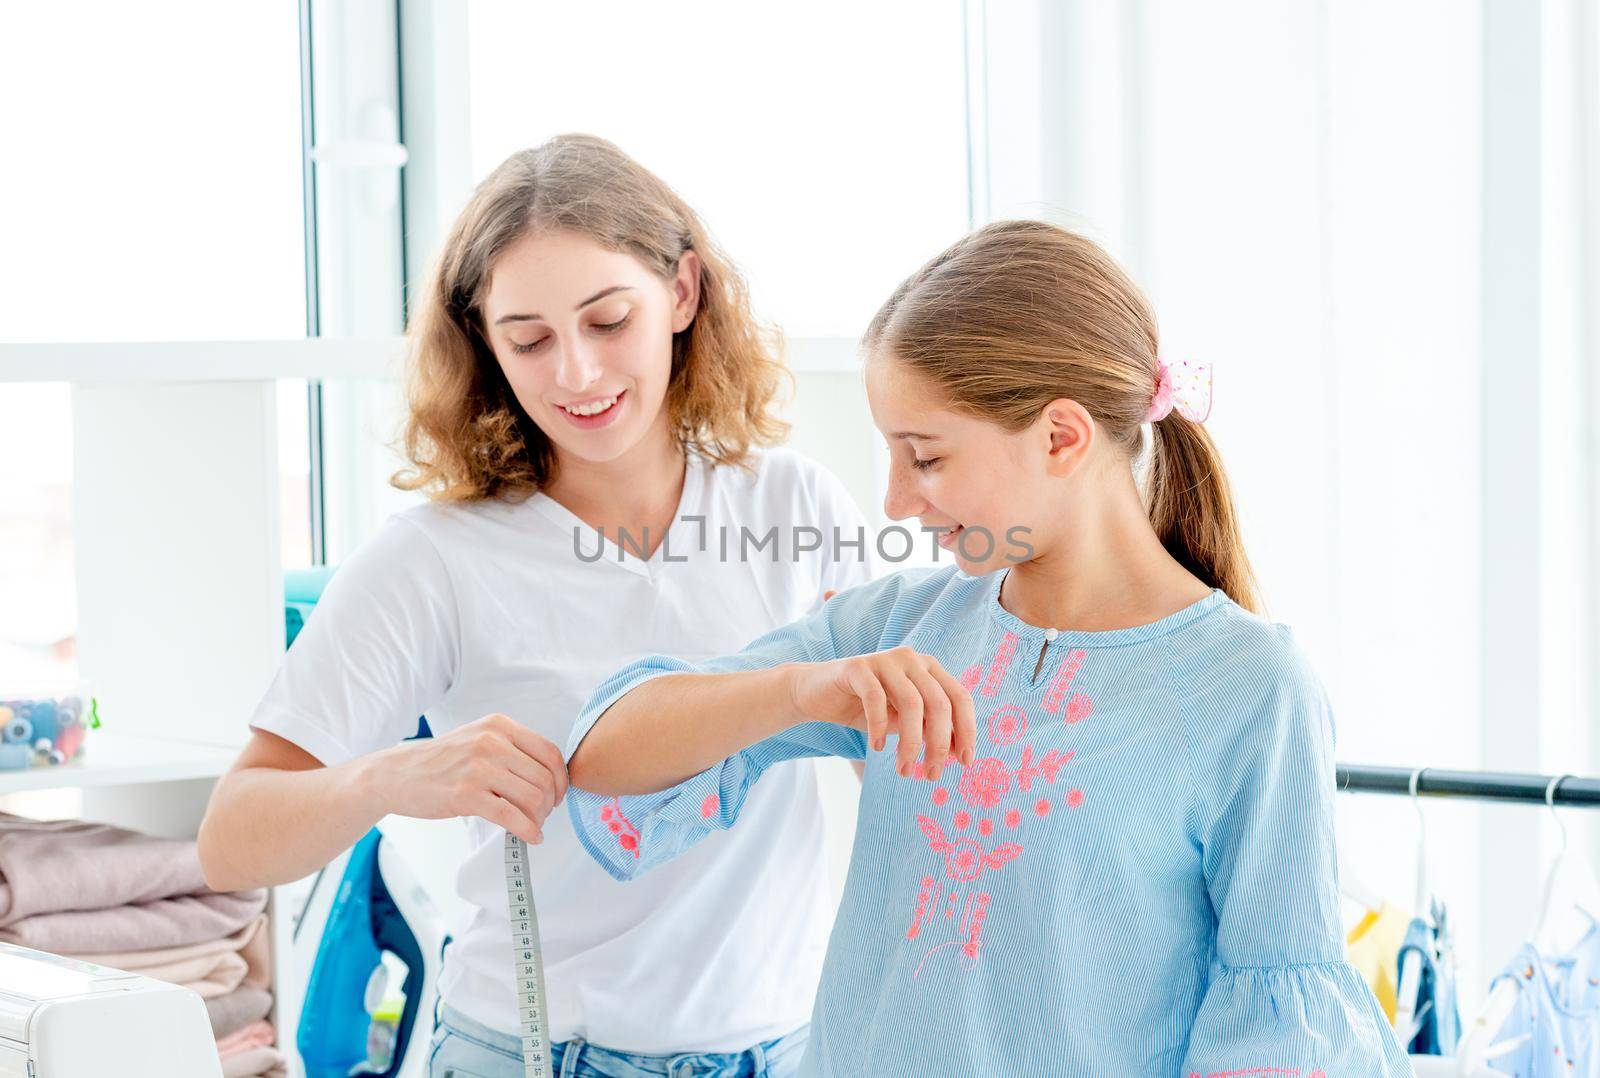 Tailor measuring her client with measuring tape indoors